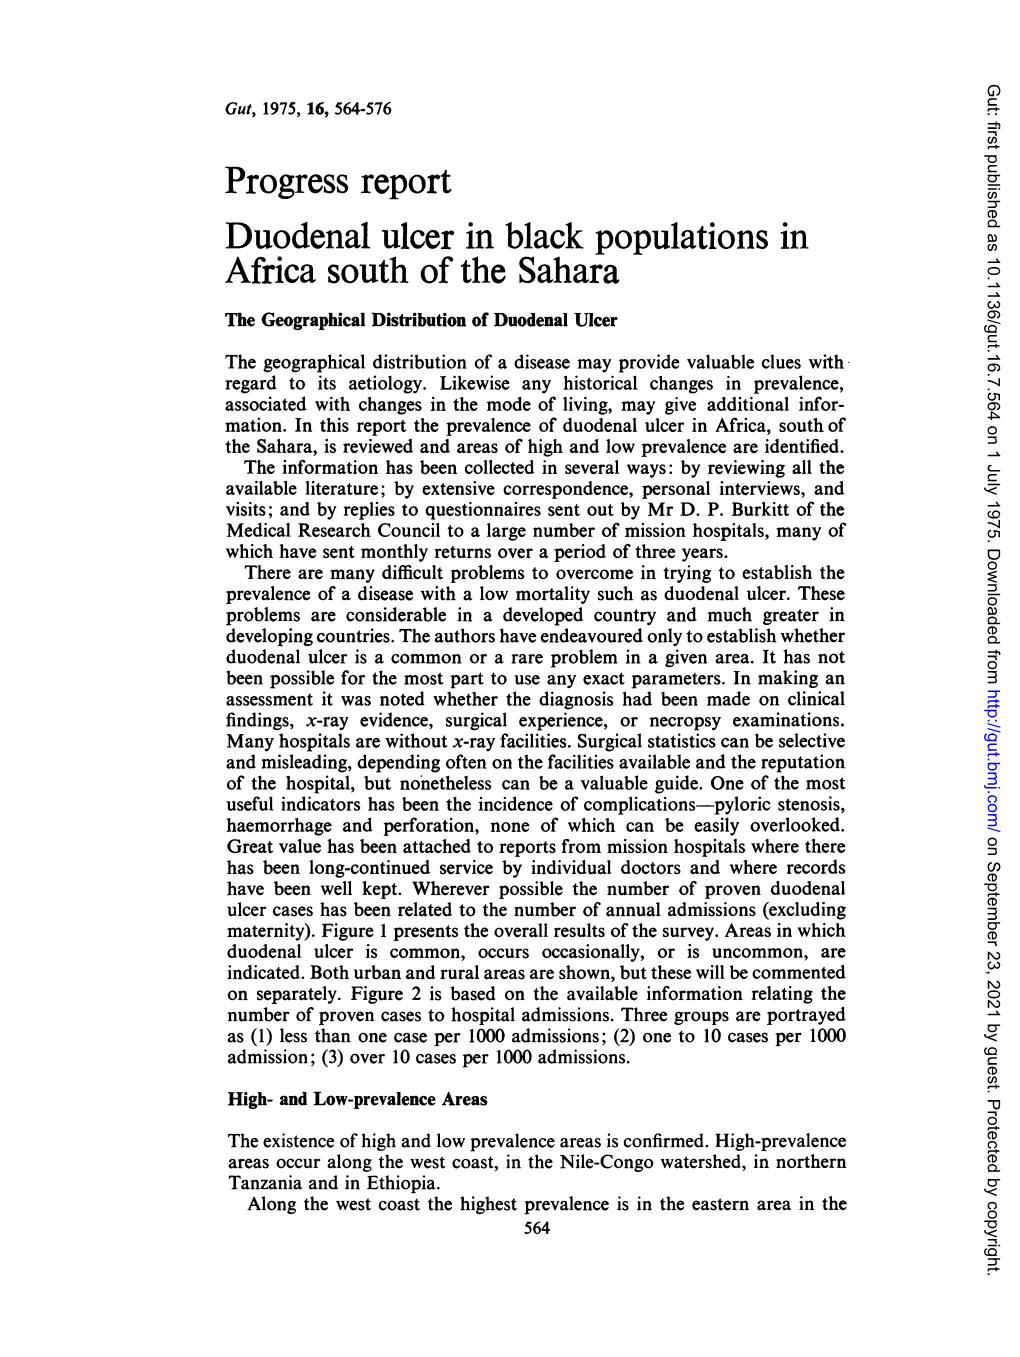 Progress Report Duodenal Ulcer in Black Populations in Africa South Of